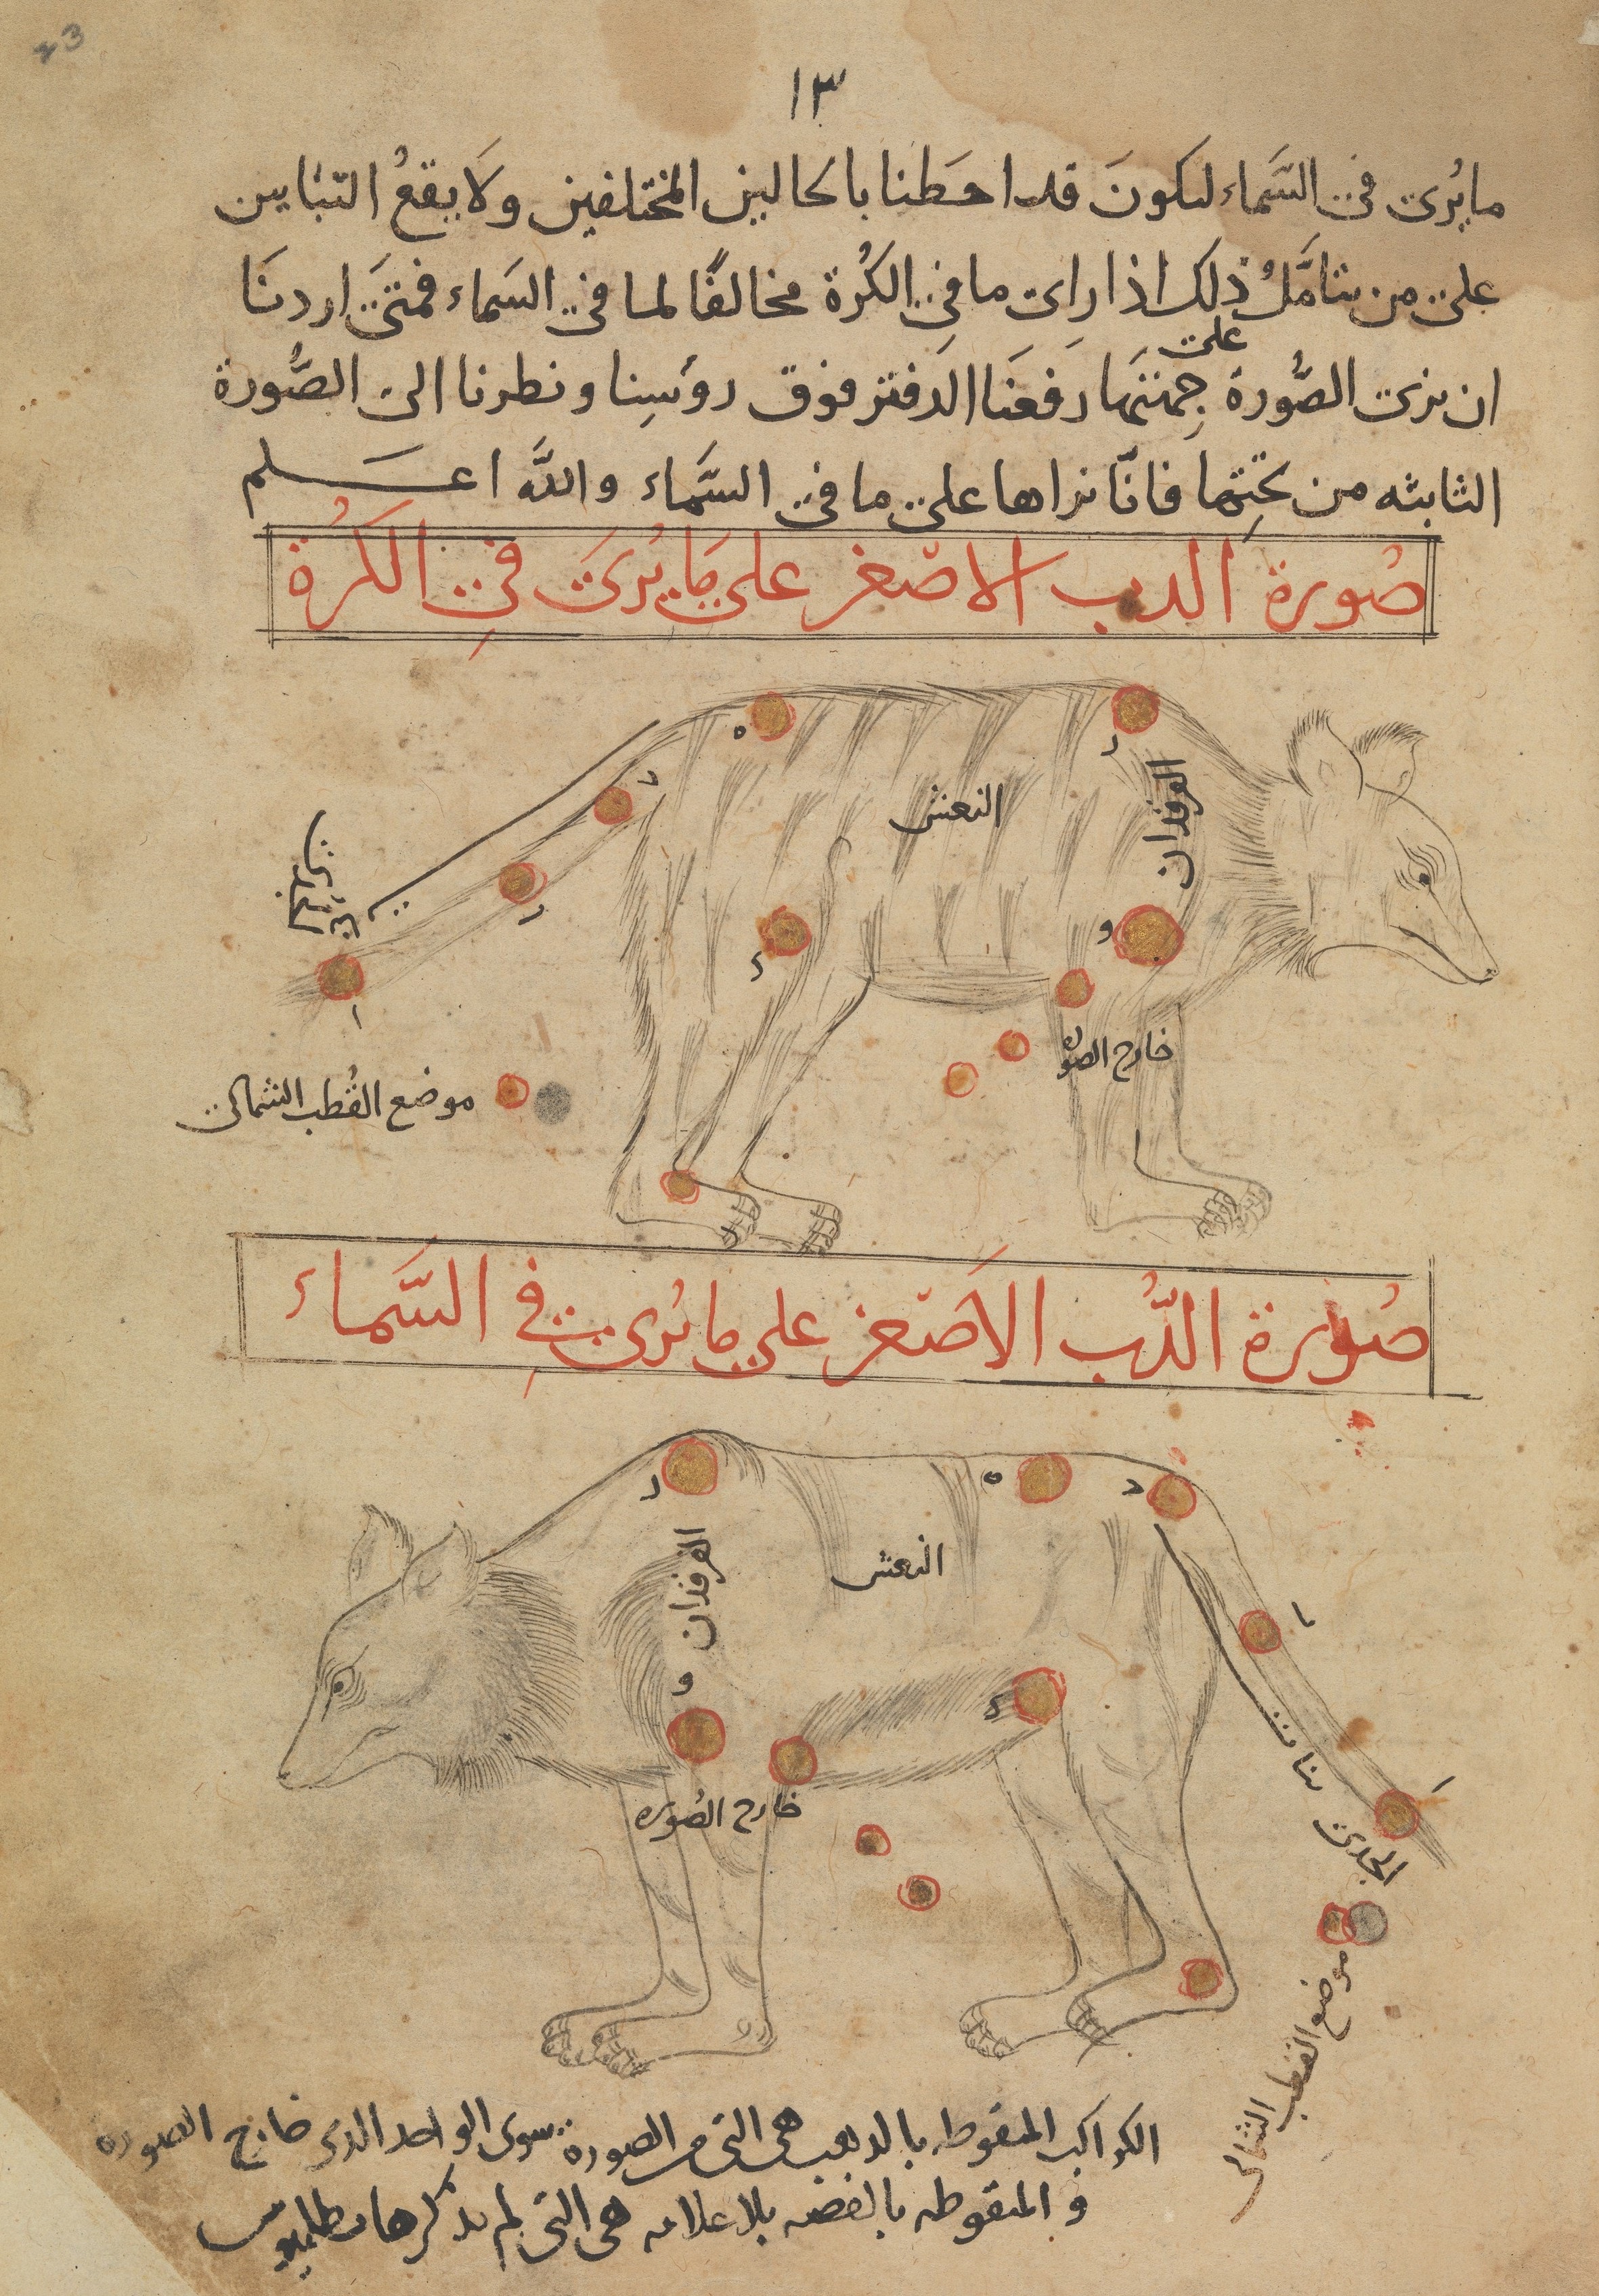 Illustrations of animals with Arabic writing